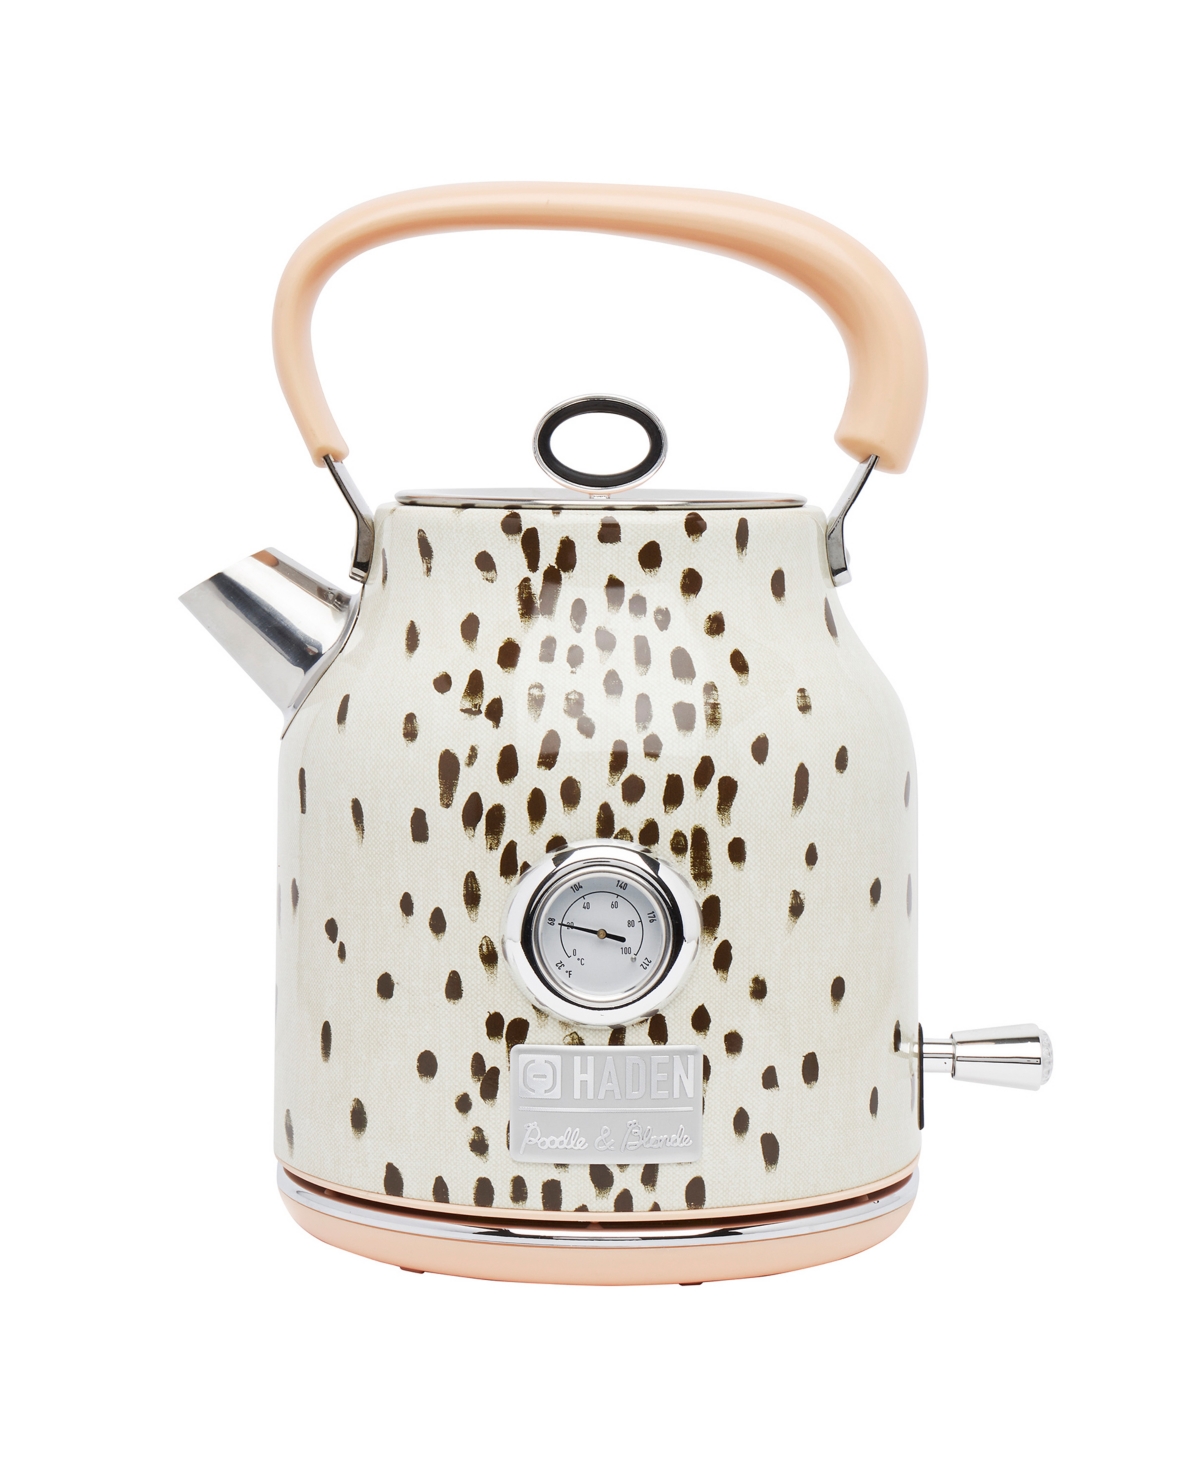 Haden Margate Poodle And Blonde 1.7 L- 7 Cup Cordless, Electric Kettle Bpa Free Auto-shut-off In White,brown Spots,pink